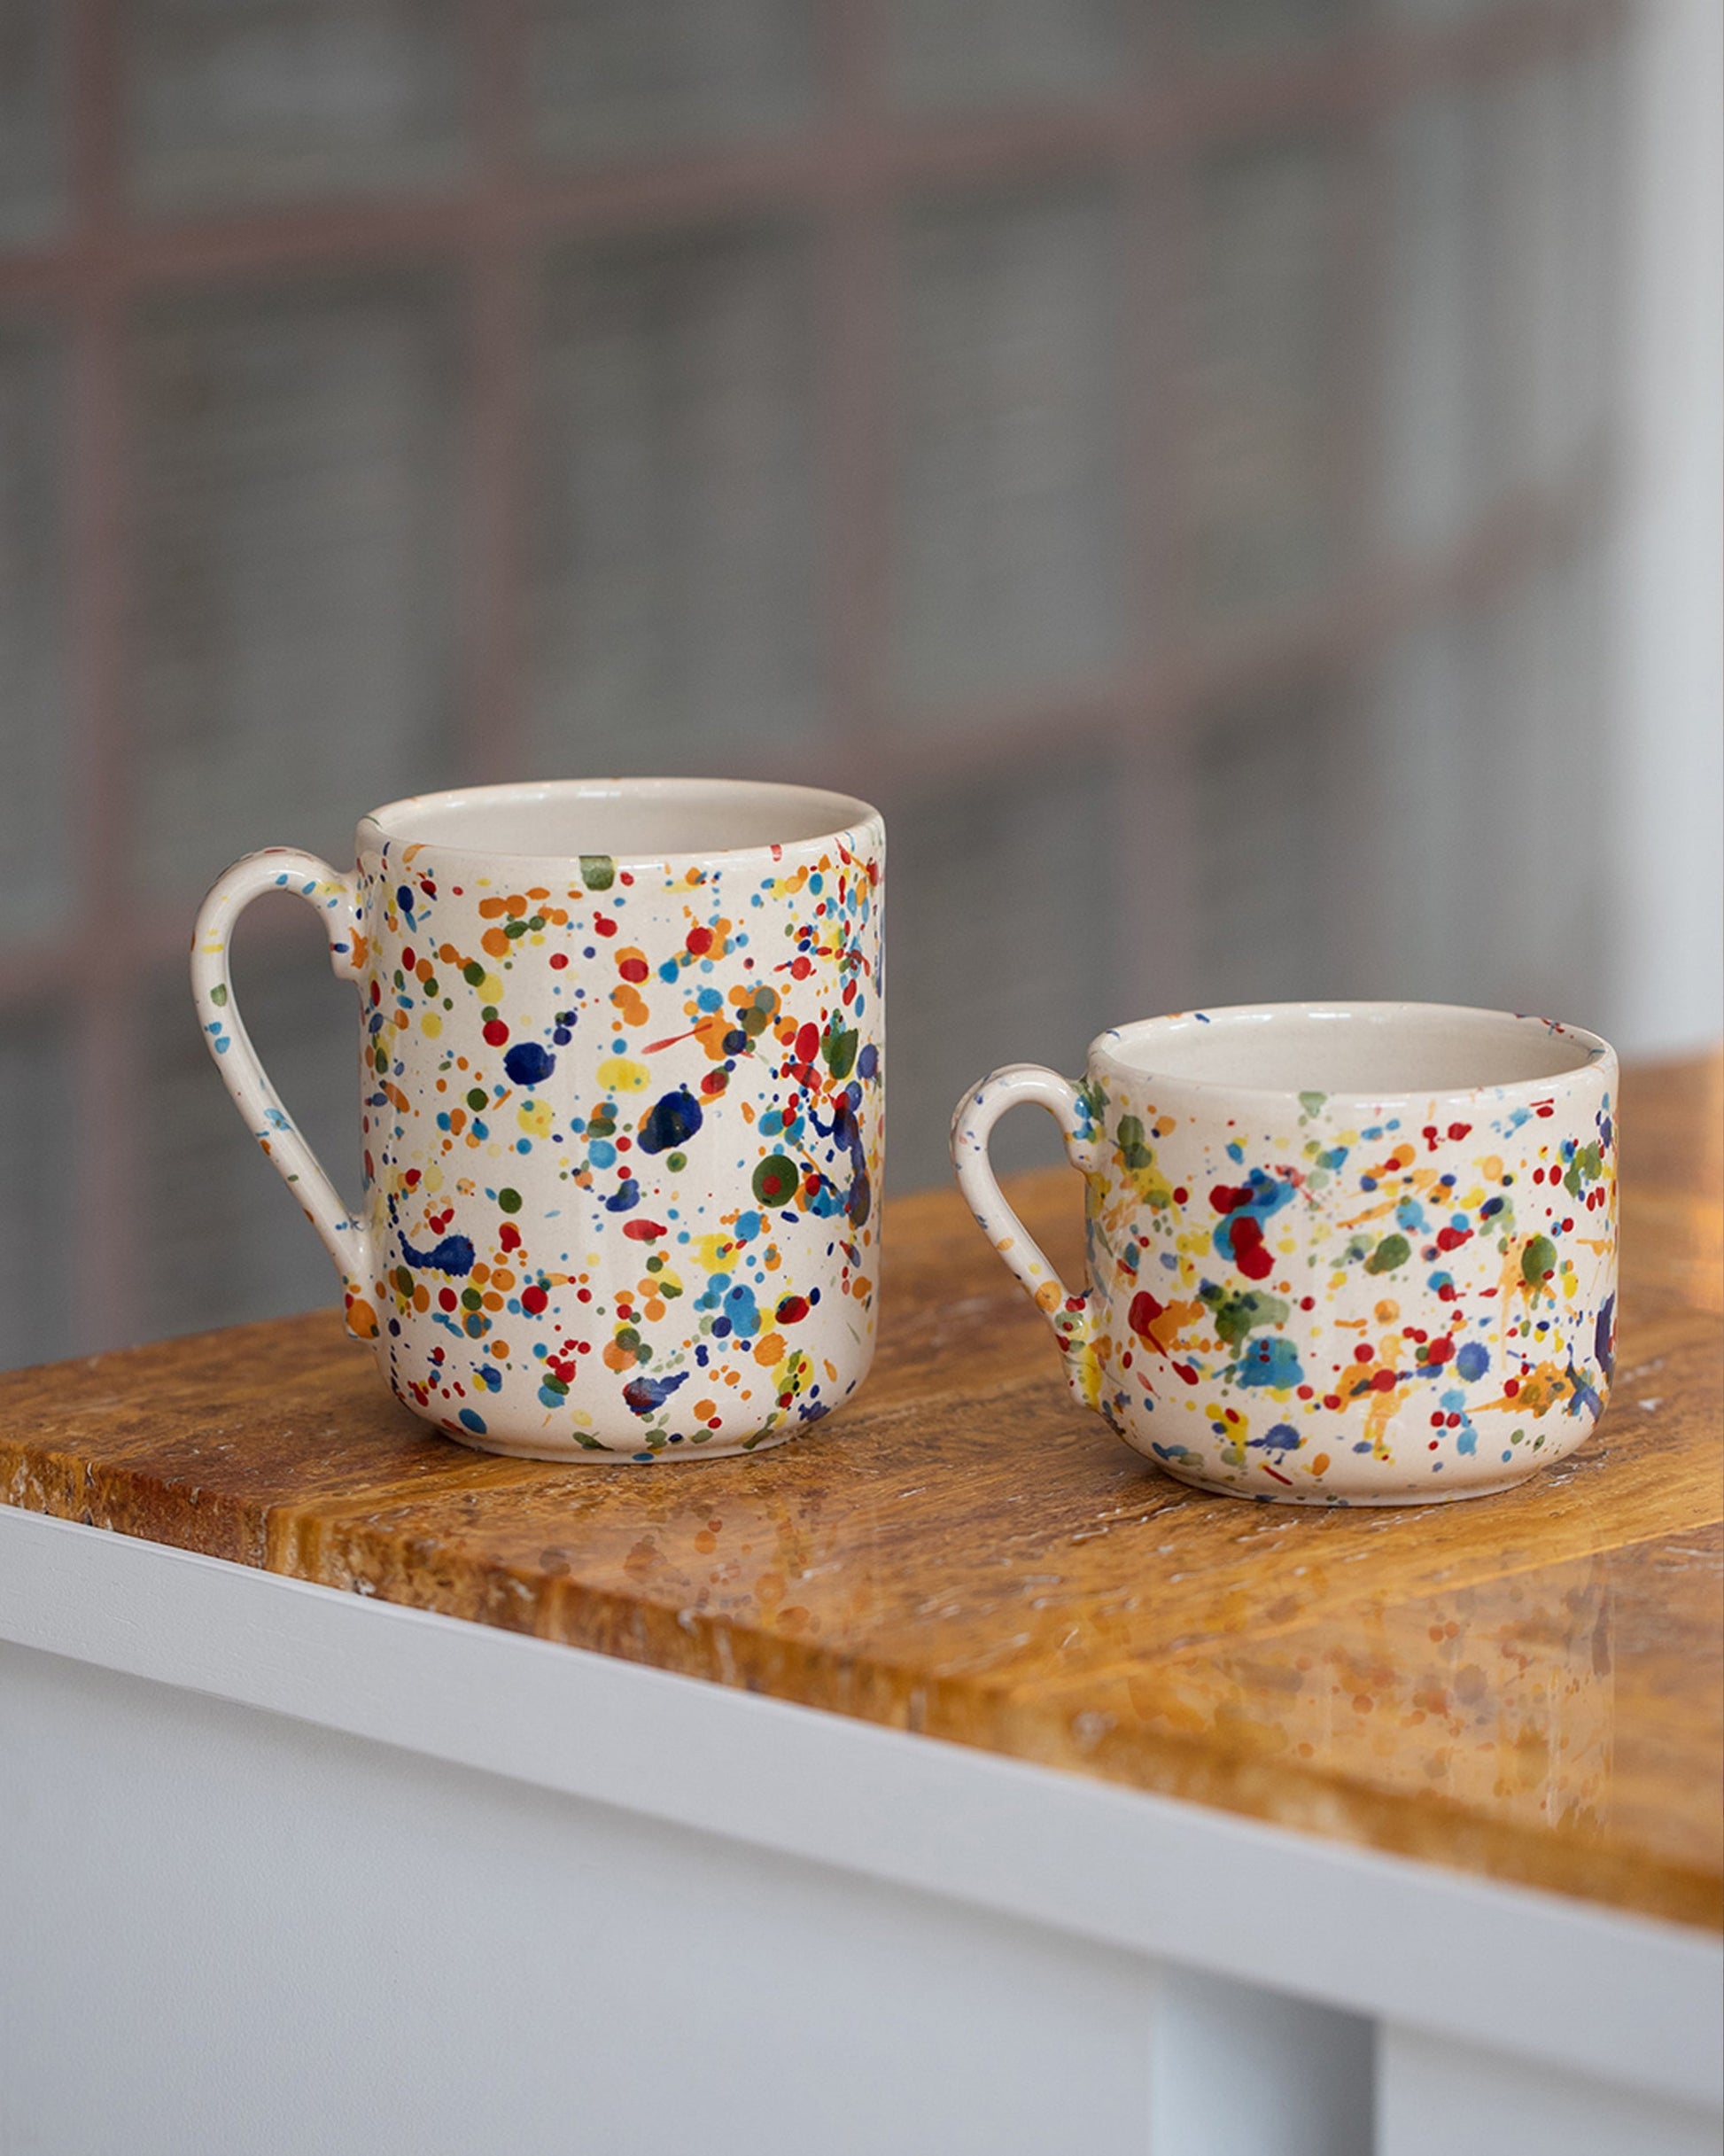 40 oz Speckled Confetti Travel Tumbler Cup by France